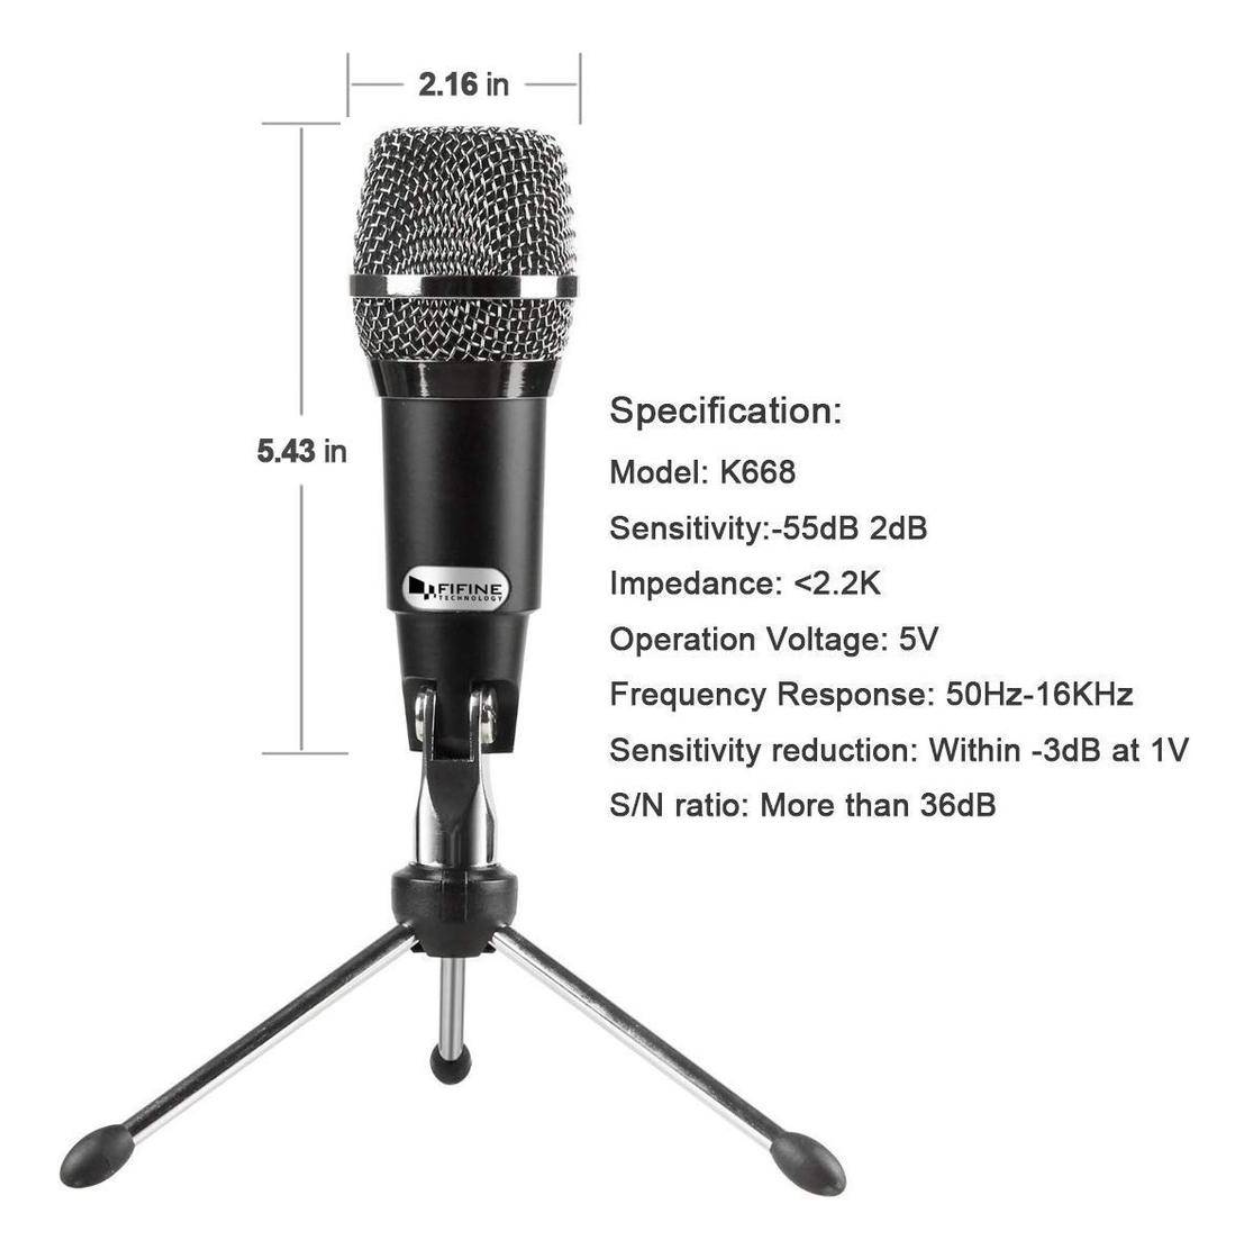 FIFINE K668 USB Microphone, Plug and Play Home Studio USB Condenser Microphone for Skype, Recordings for YouTube, Google Voice Search, Games-Windows or Mac (K-668)